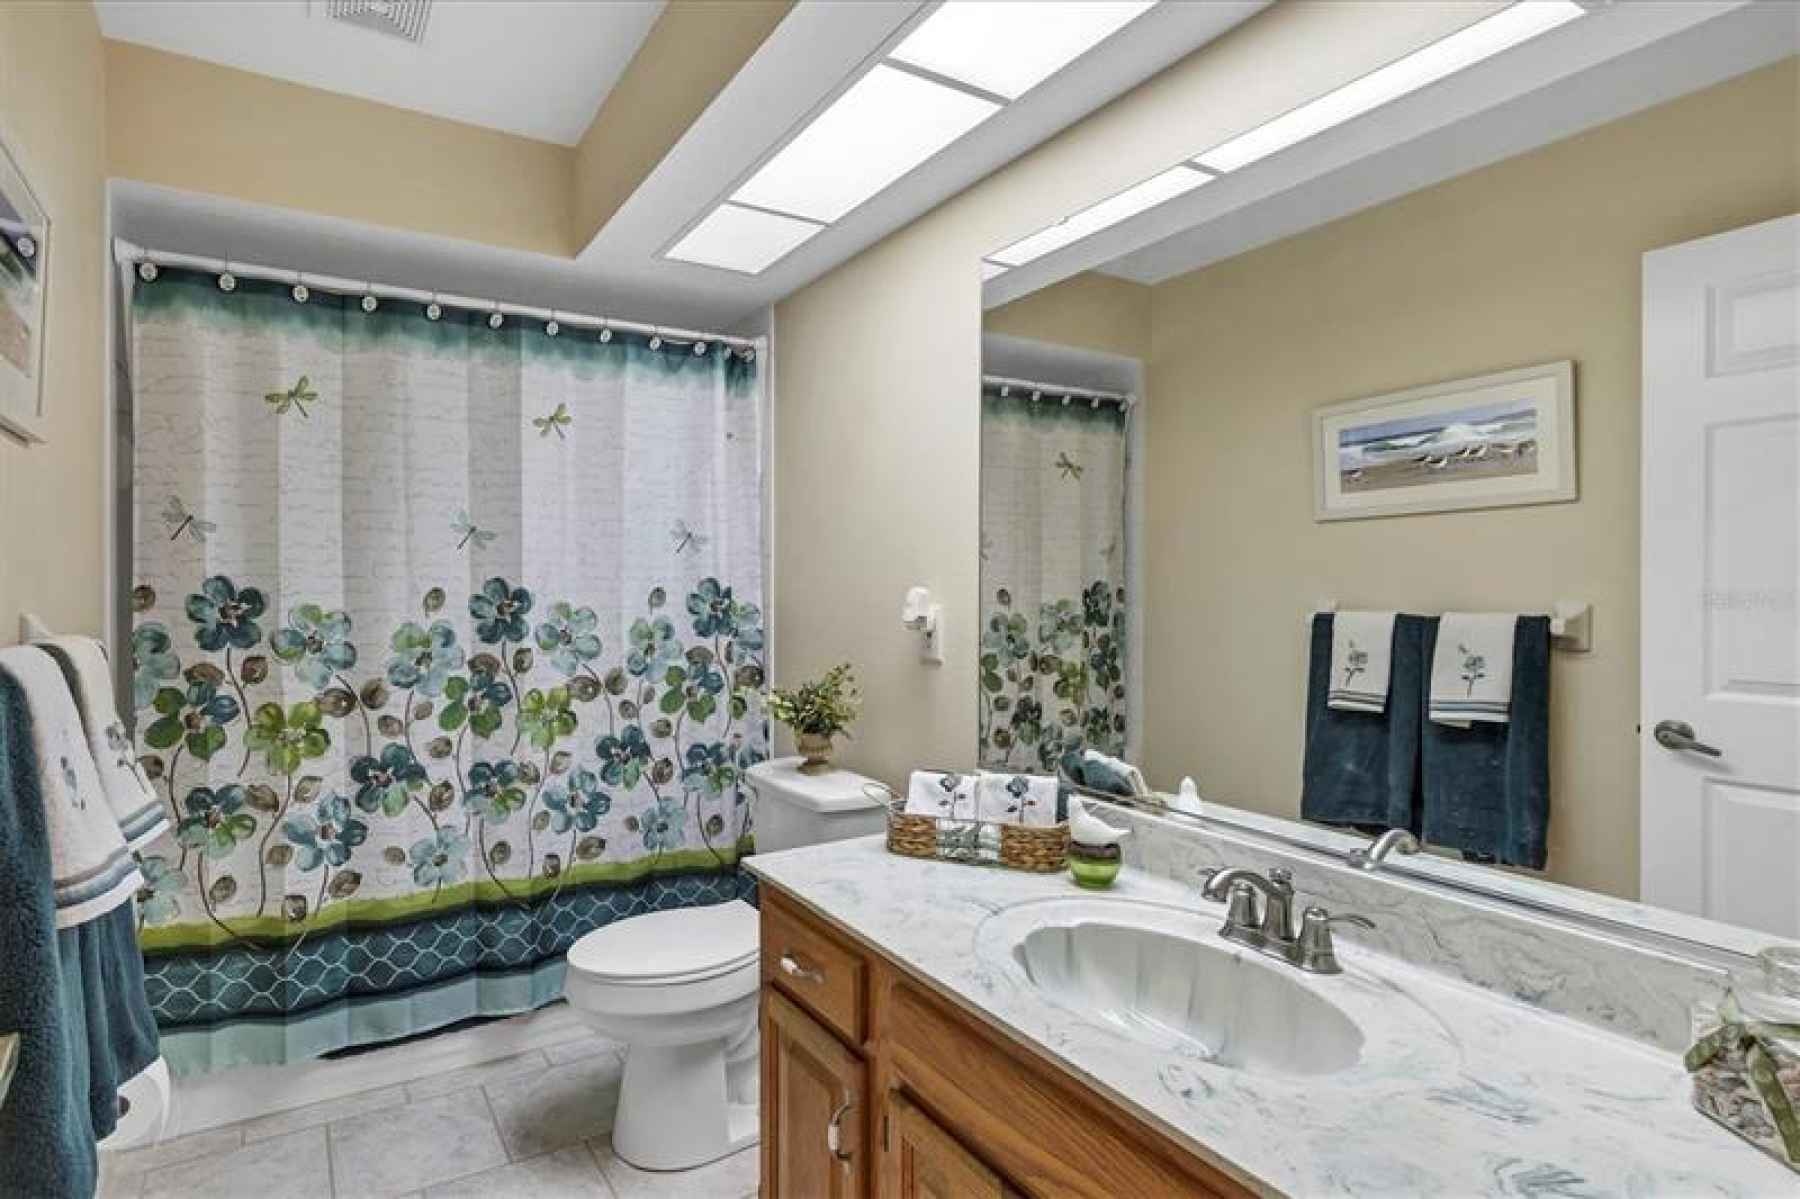 Hall bath that serves the second and third bedrooms